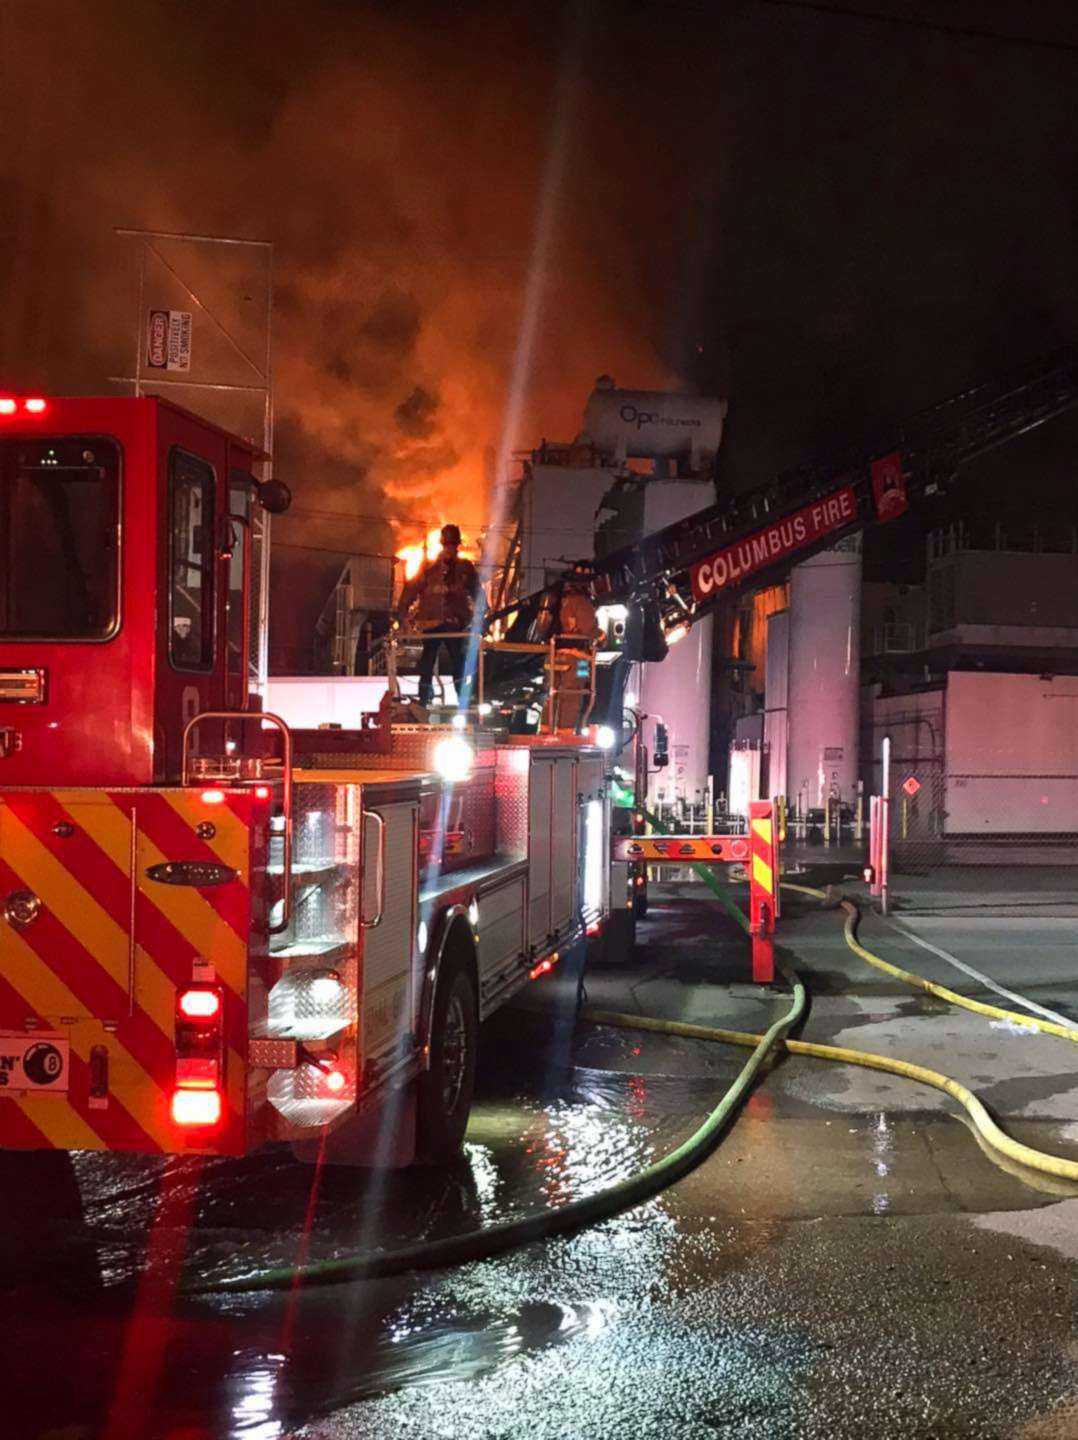 PHOTO: Firefighters work to contain an explosion and fire at a paint manufacturing plant overnight, April 8, 2021, in Columbus, Ohio.